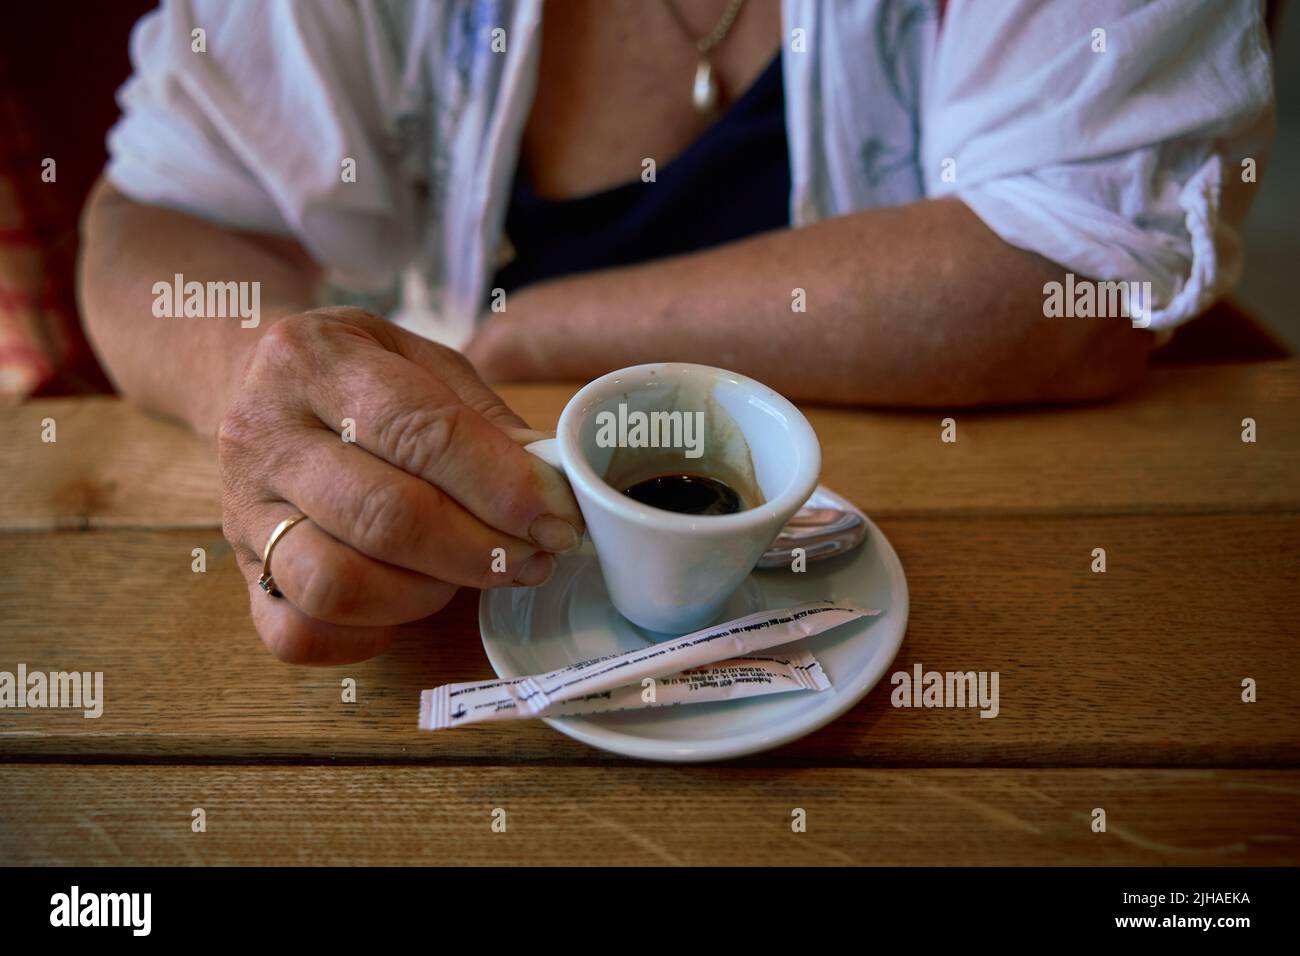 Woman drinking espresso coffee at a restaurant table Stock Photo